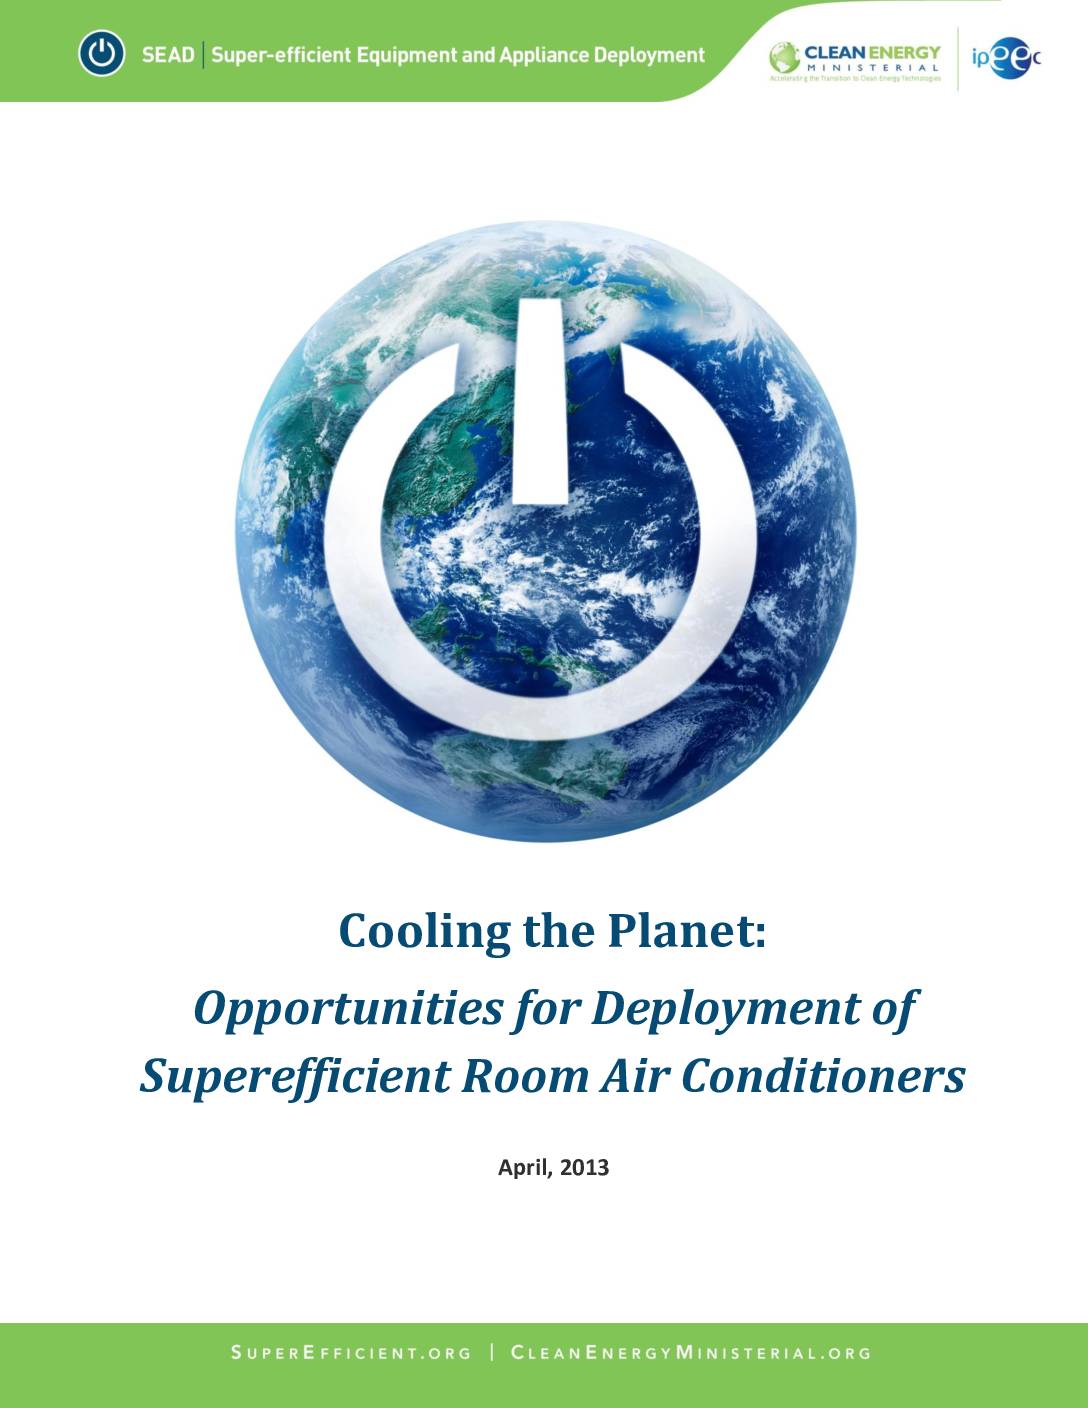 Cooling the Planet: Opportunities for Deployment of Superefficient Room Air Conditioners